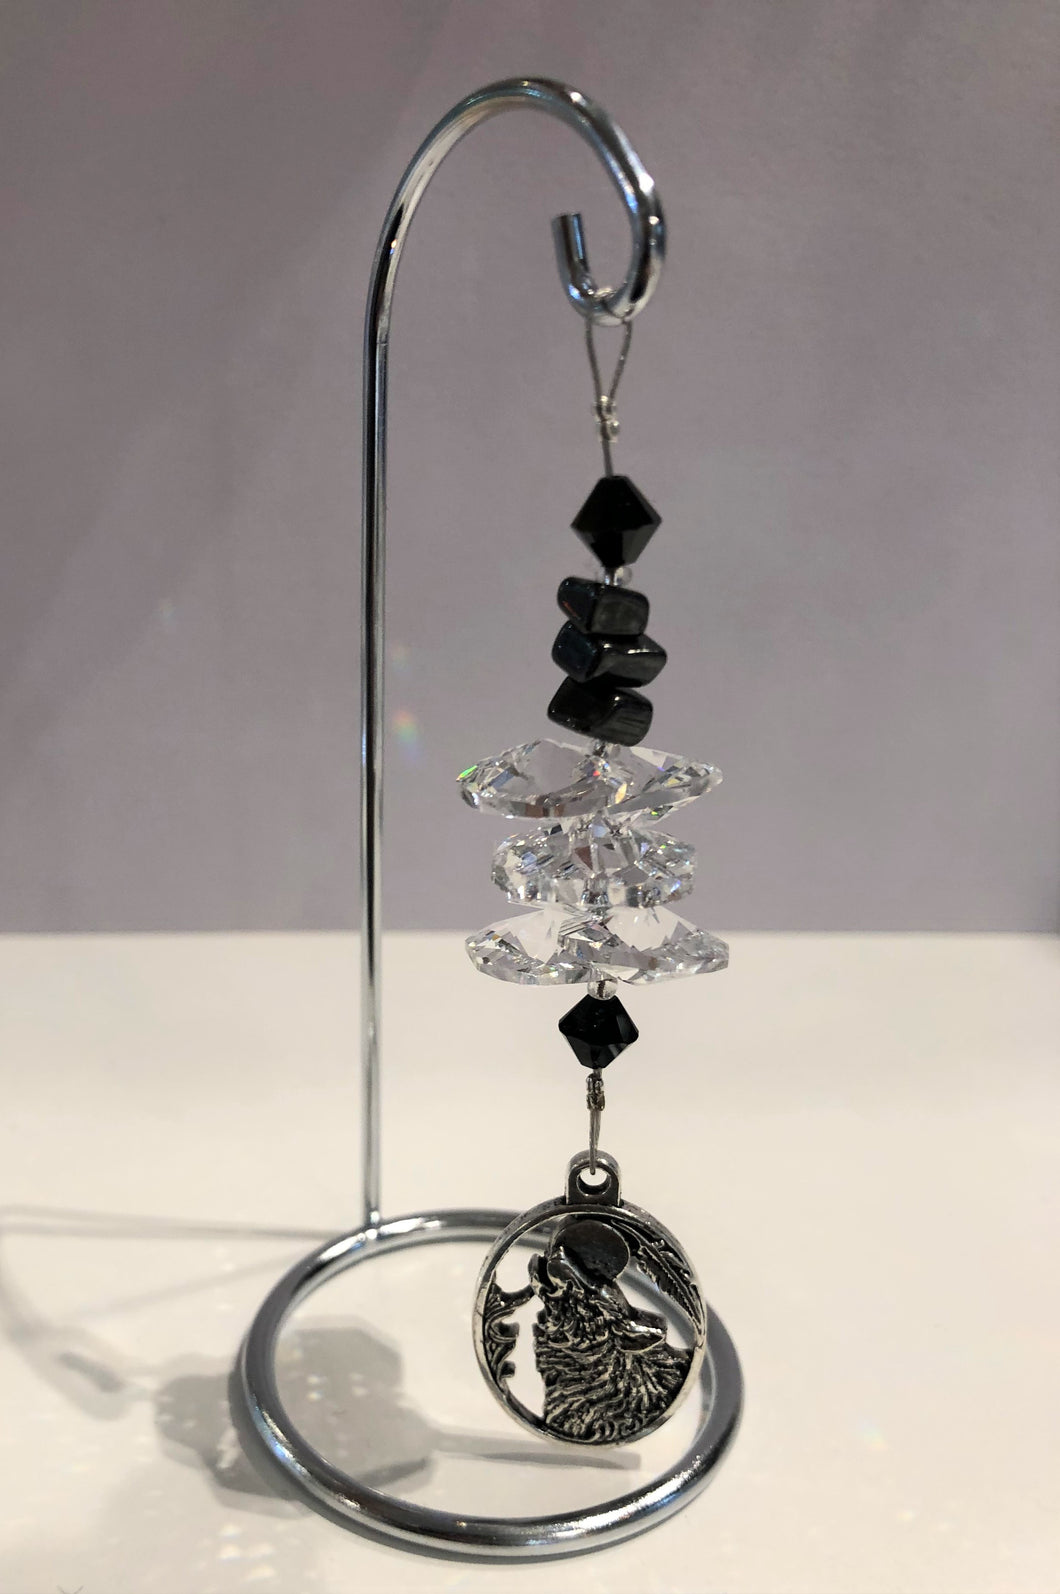 Wolf - crystal suncatcher is decorated with Hematite gemstones and come on this amazing small stand.